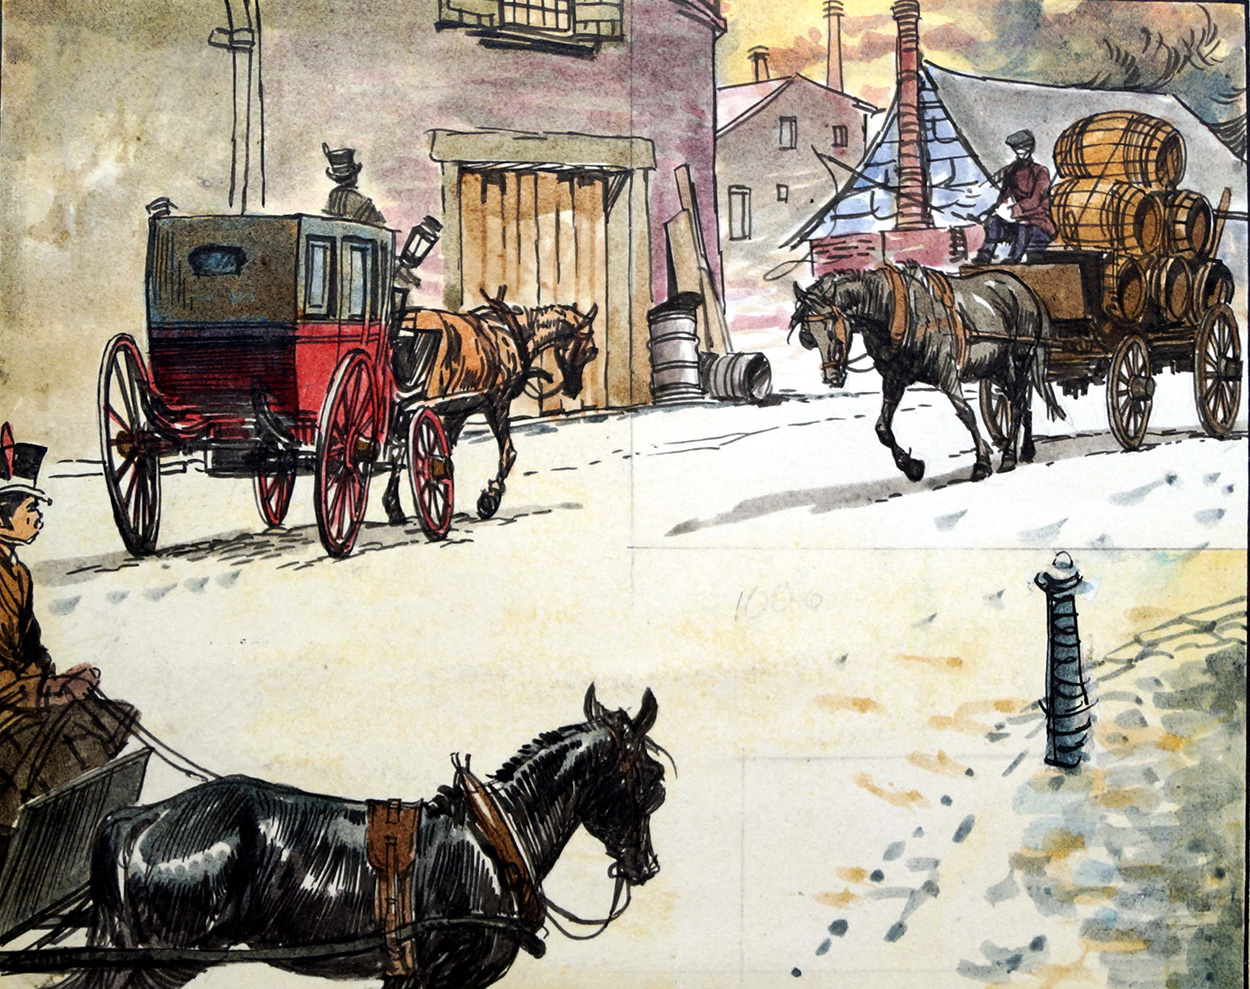 Black Beauty - Out In The Street (Original) art by Black Beauty (Carlos Roume) Art at The Illustration Art Gallery